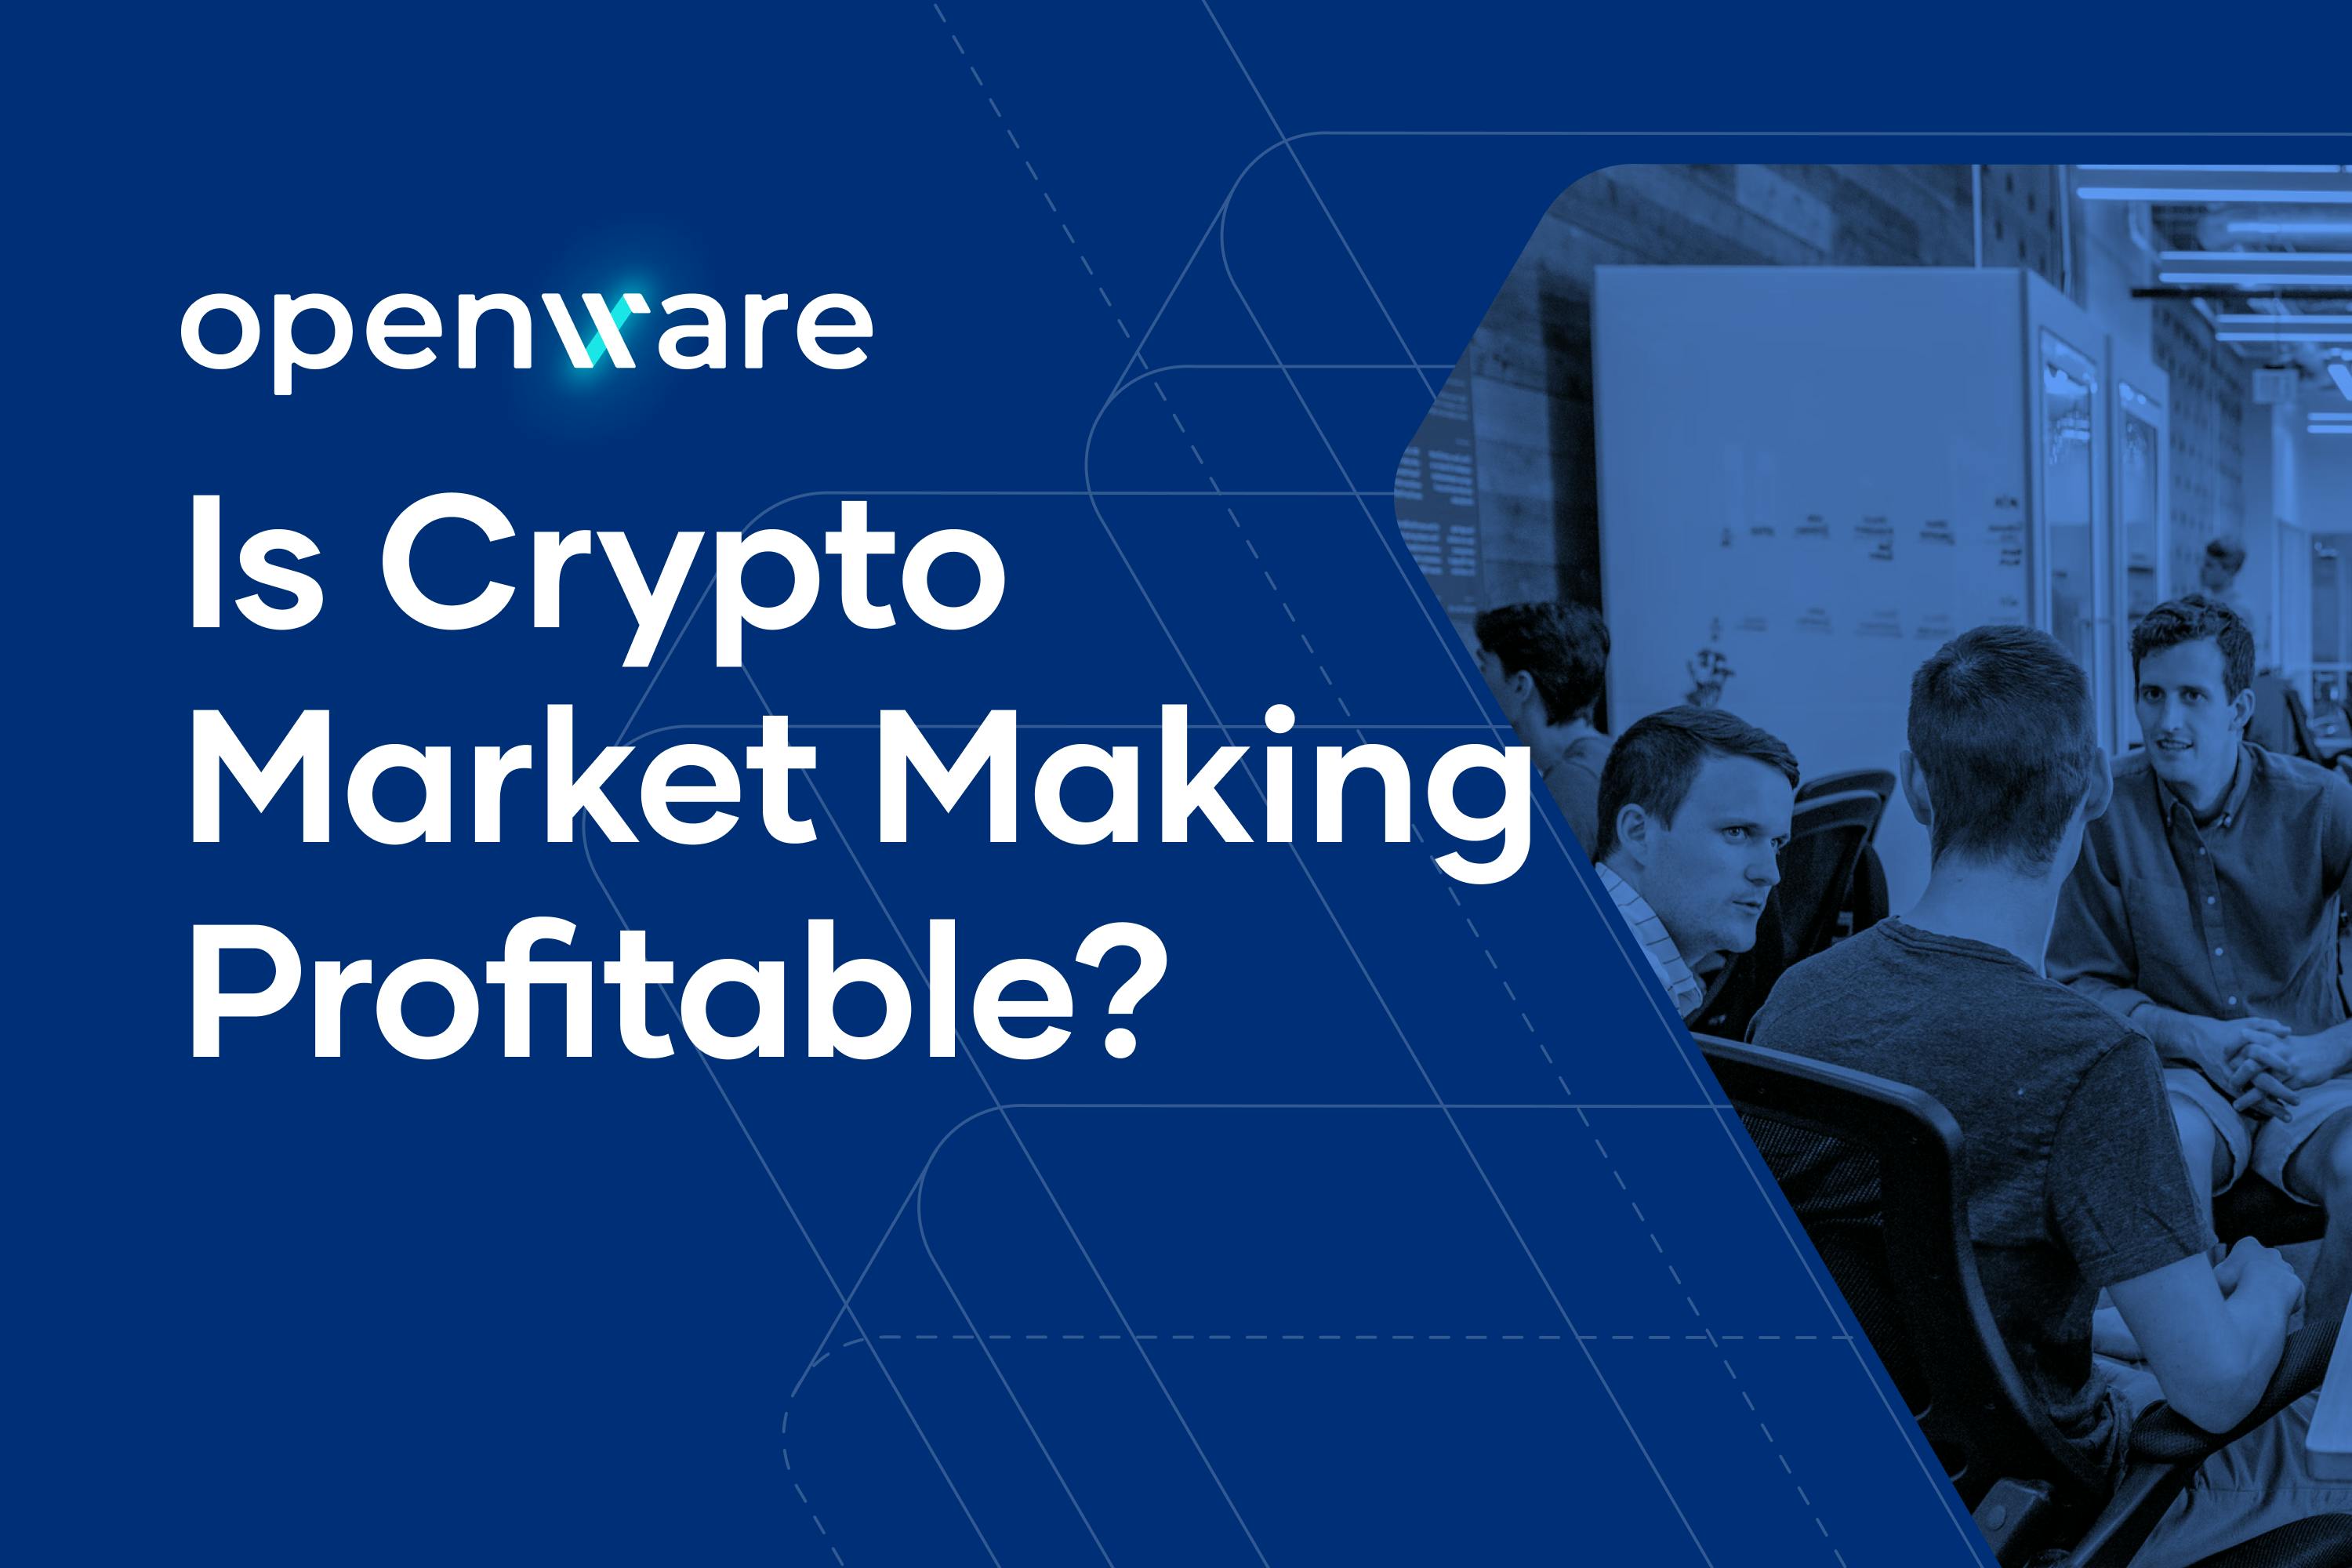 Banner Image showing the words "Is Crypto Market Making Profitable"